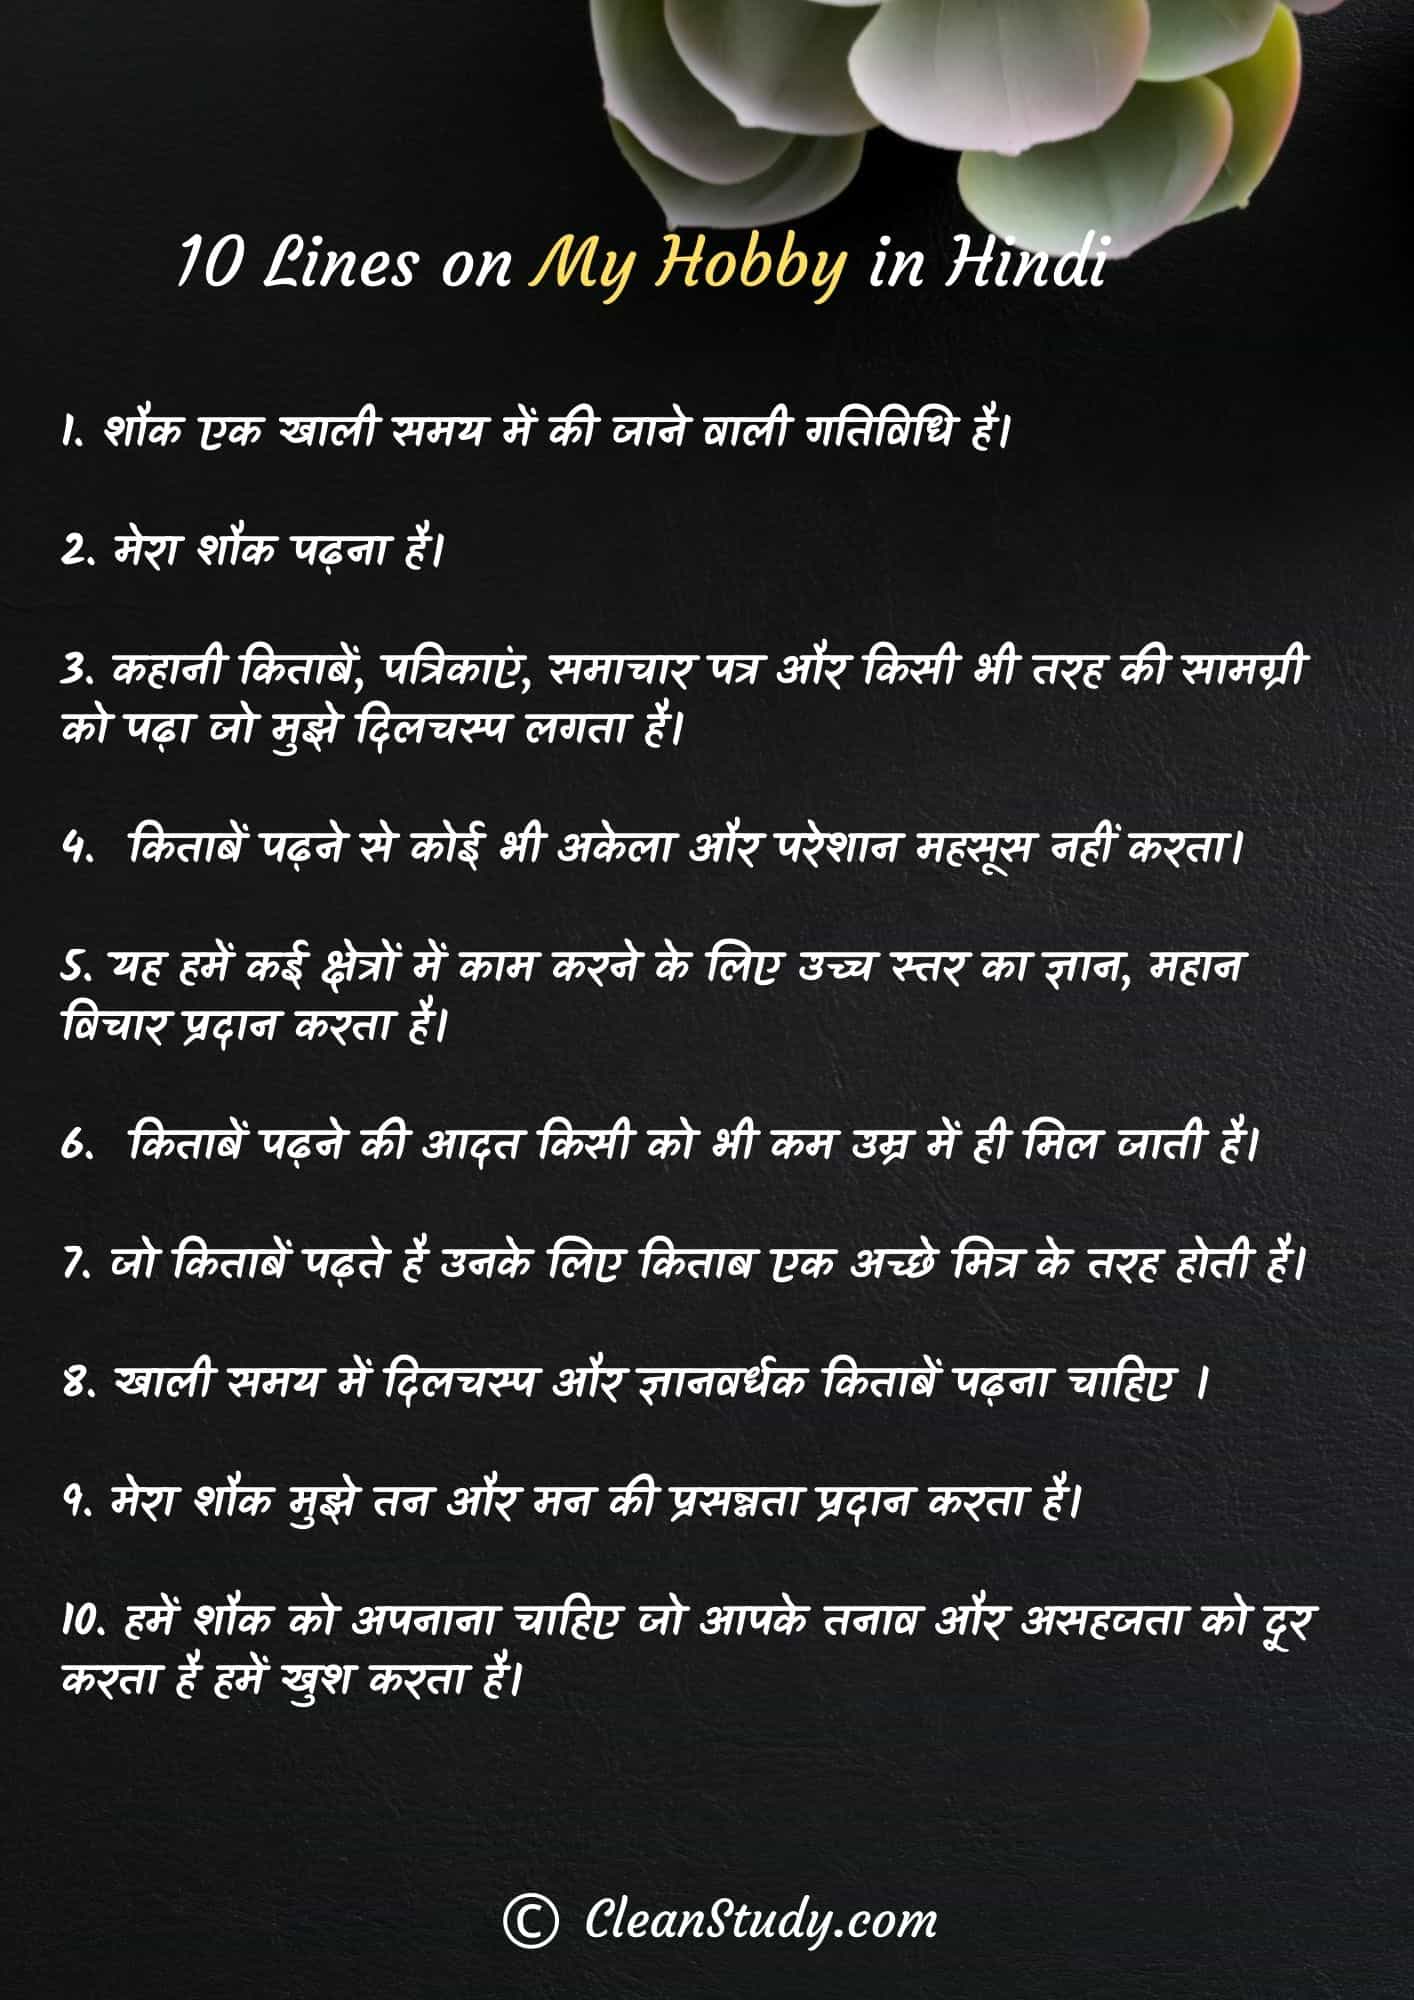 10 Lines on My Hobby in Hindi